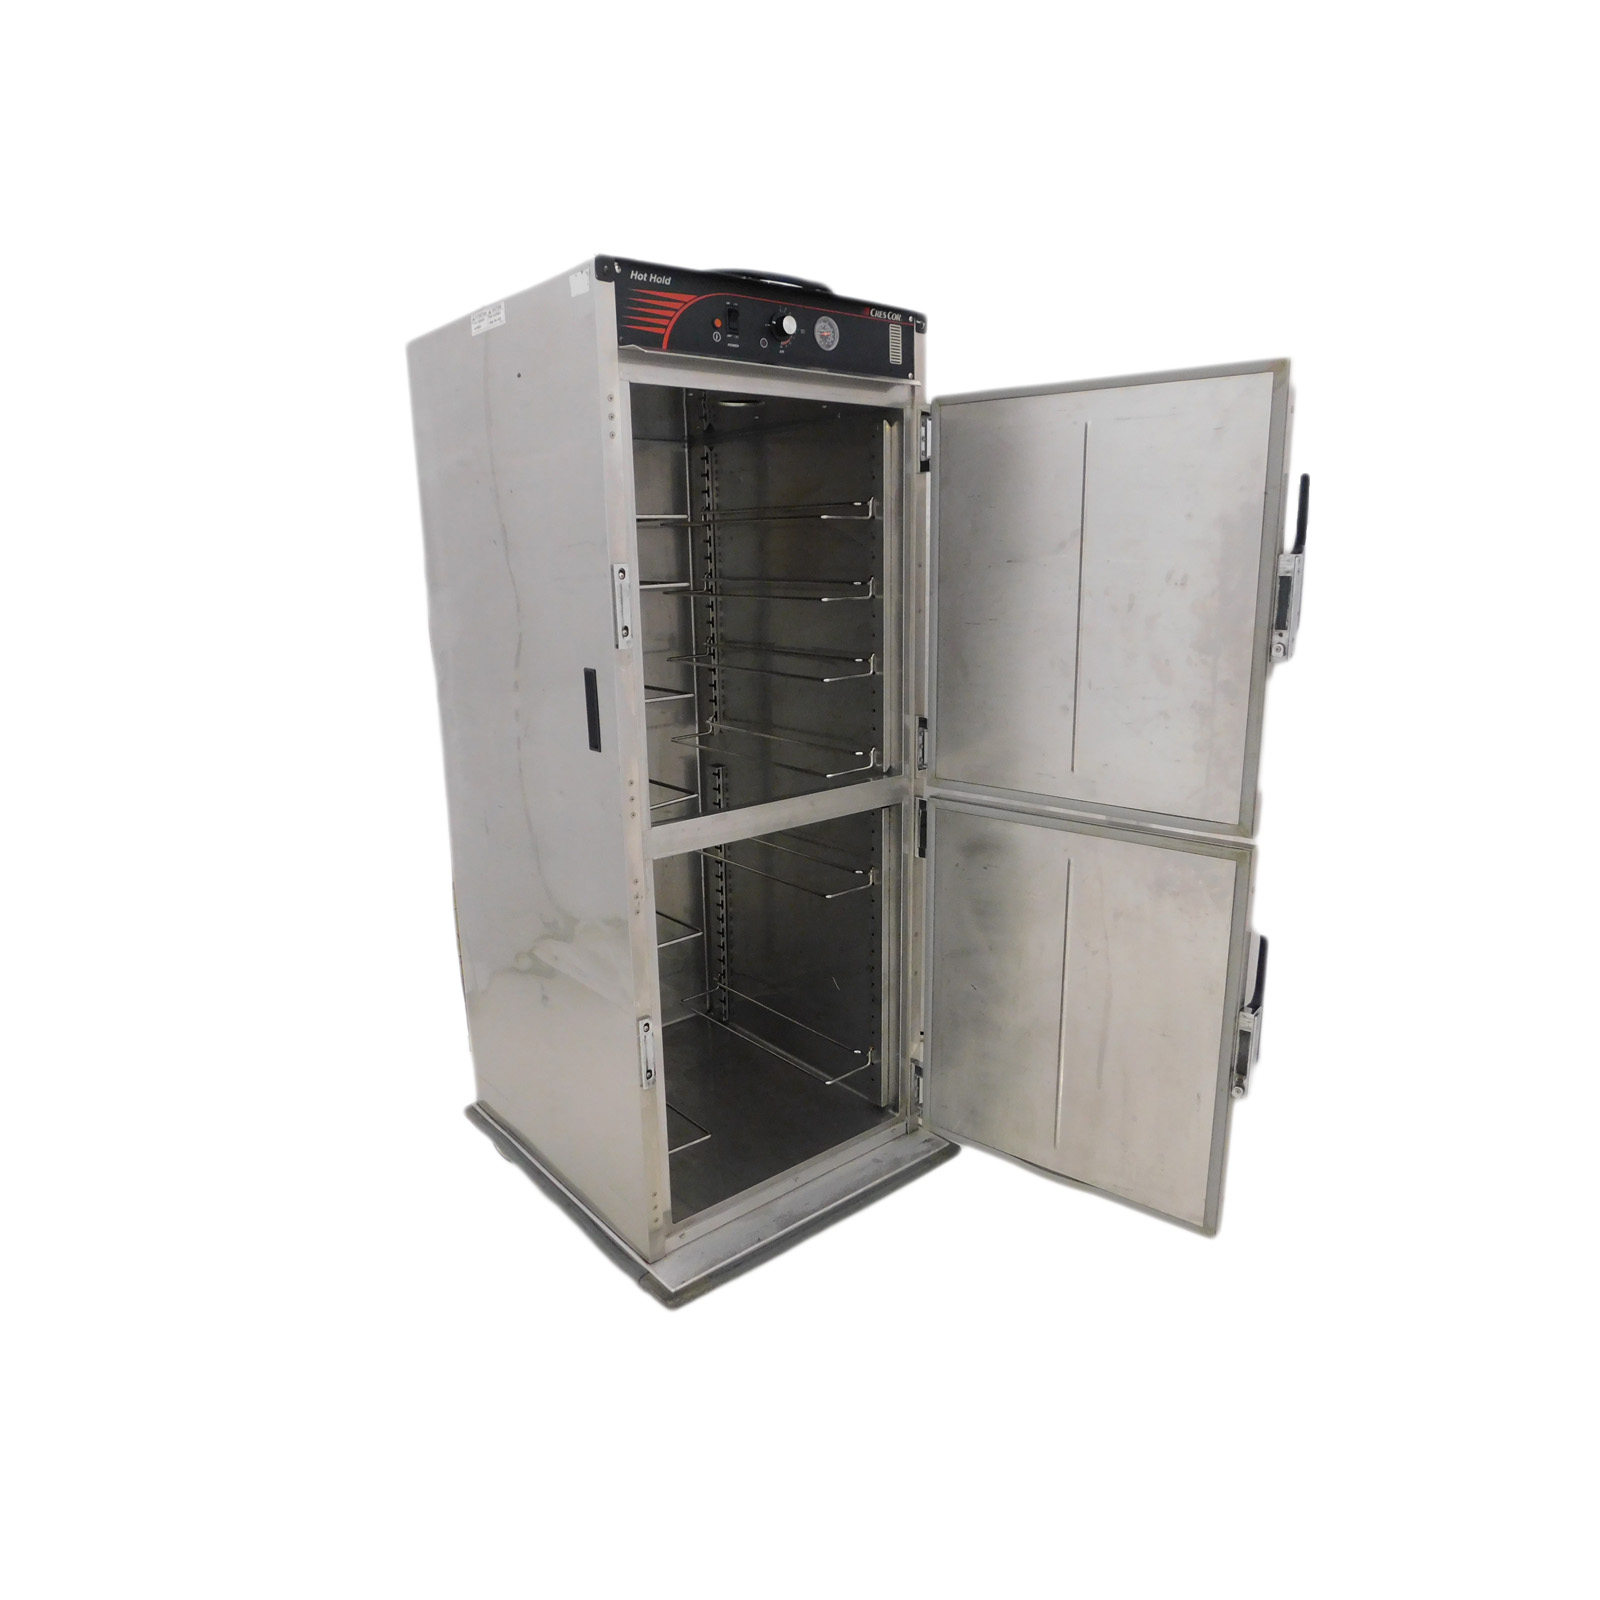 Food warmer/hot box Rentals Canton CT  Where to rent FOOD WARMER/HOT BOX  in Hartford CT, Torrington, Winsted, Farmington Valley